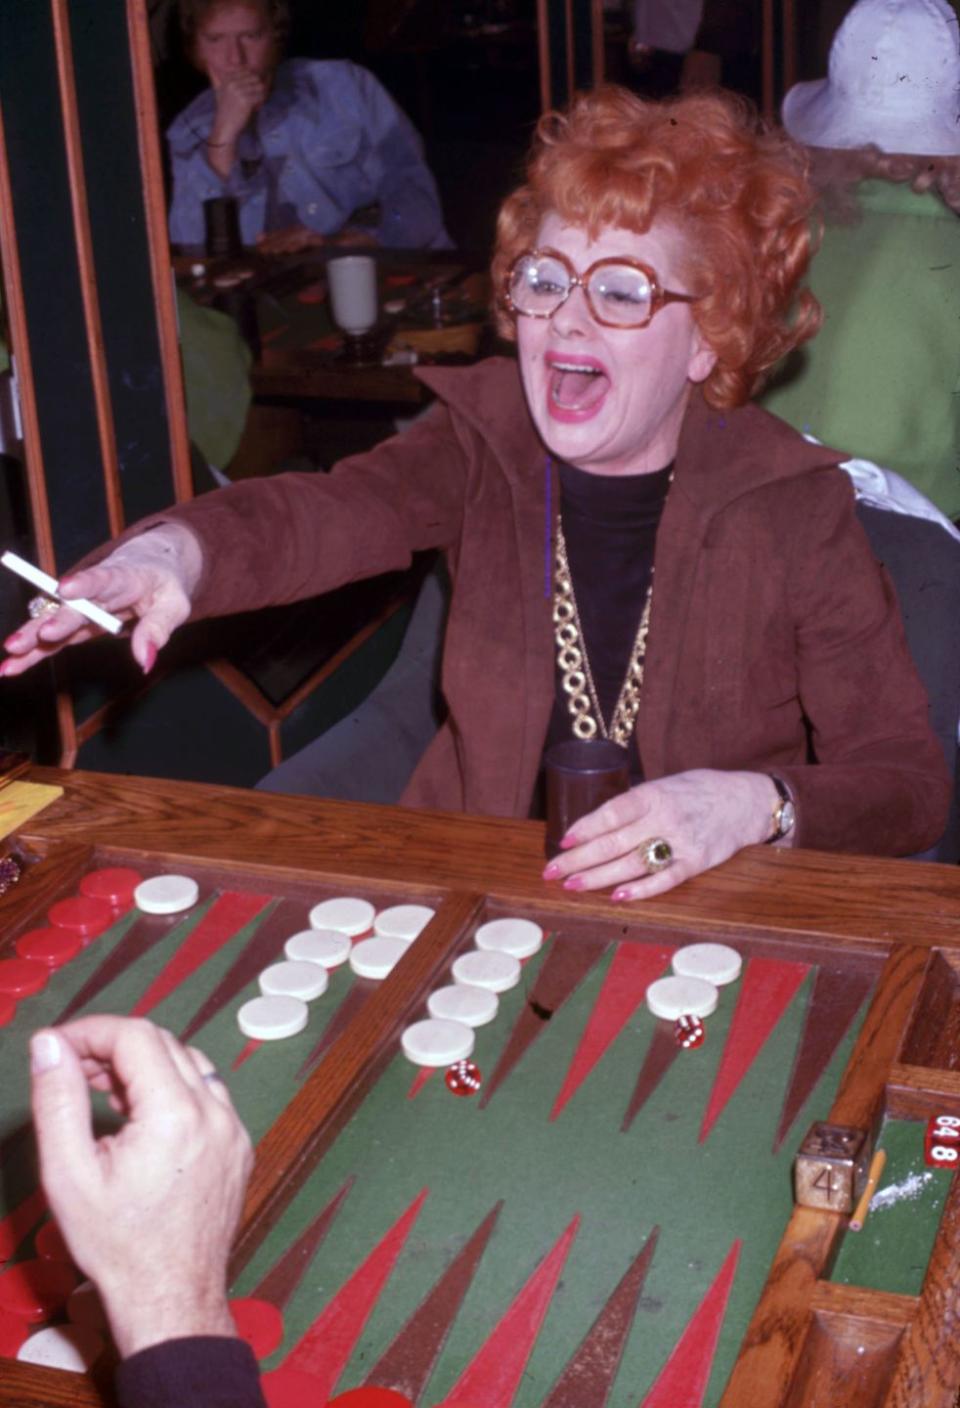 1978: Playing a rousing game of backgammon.